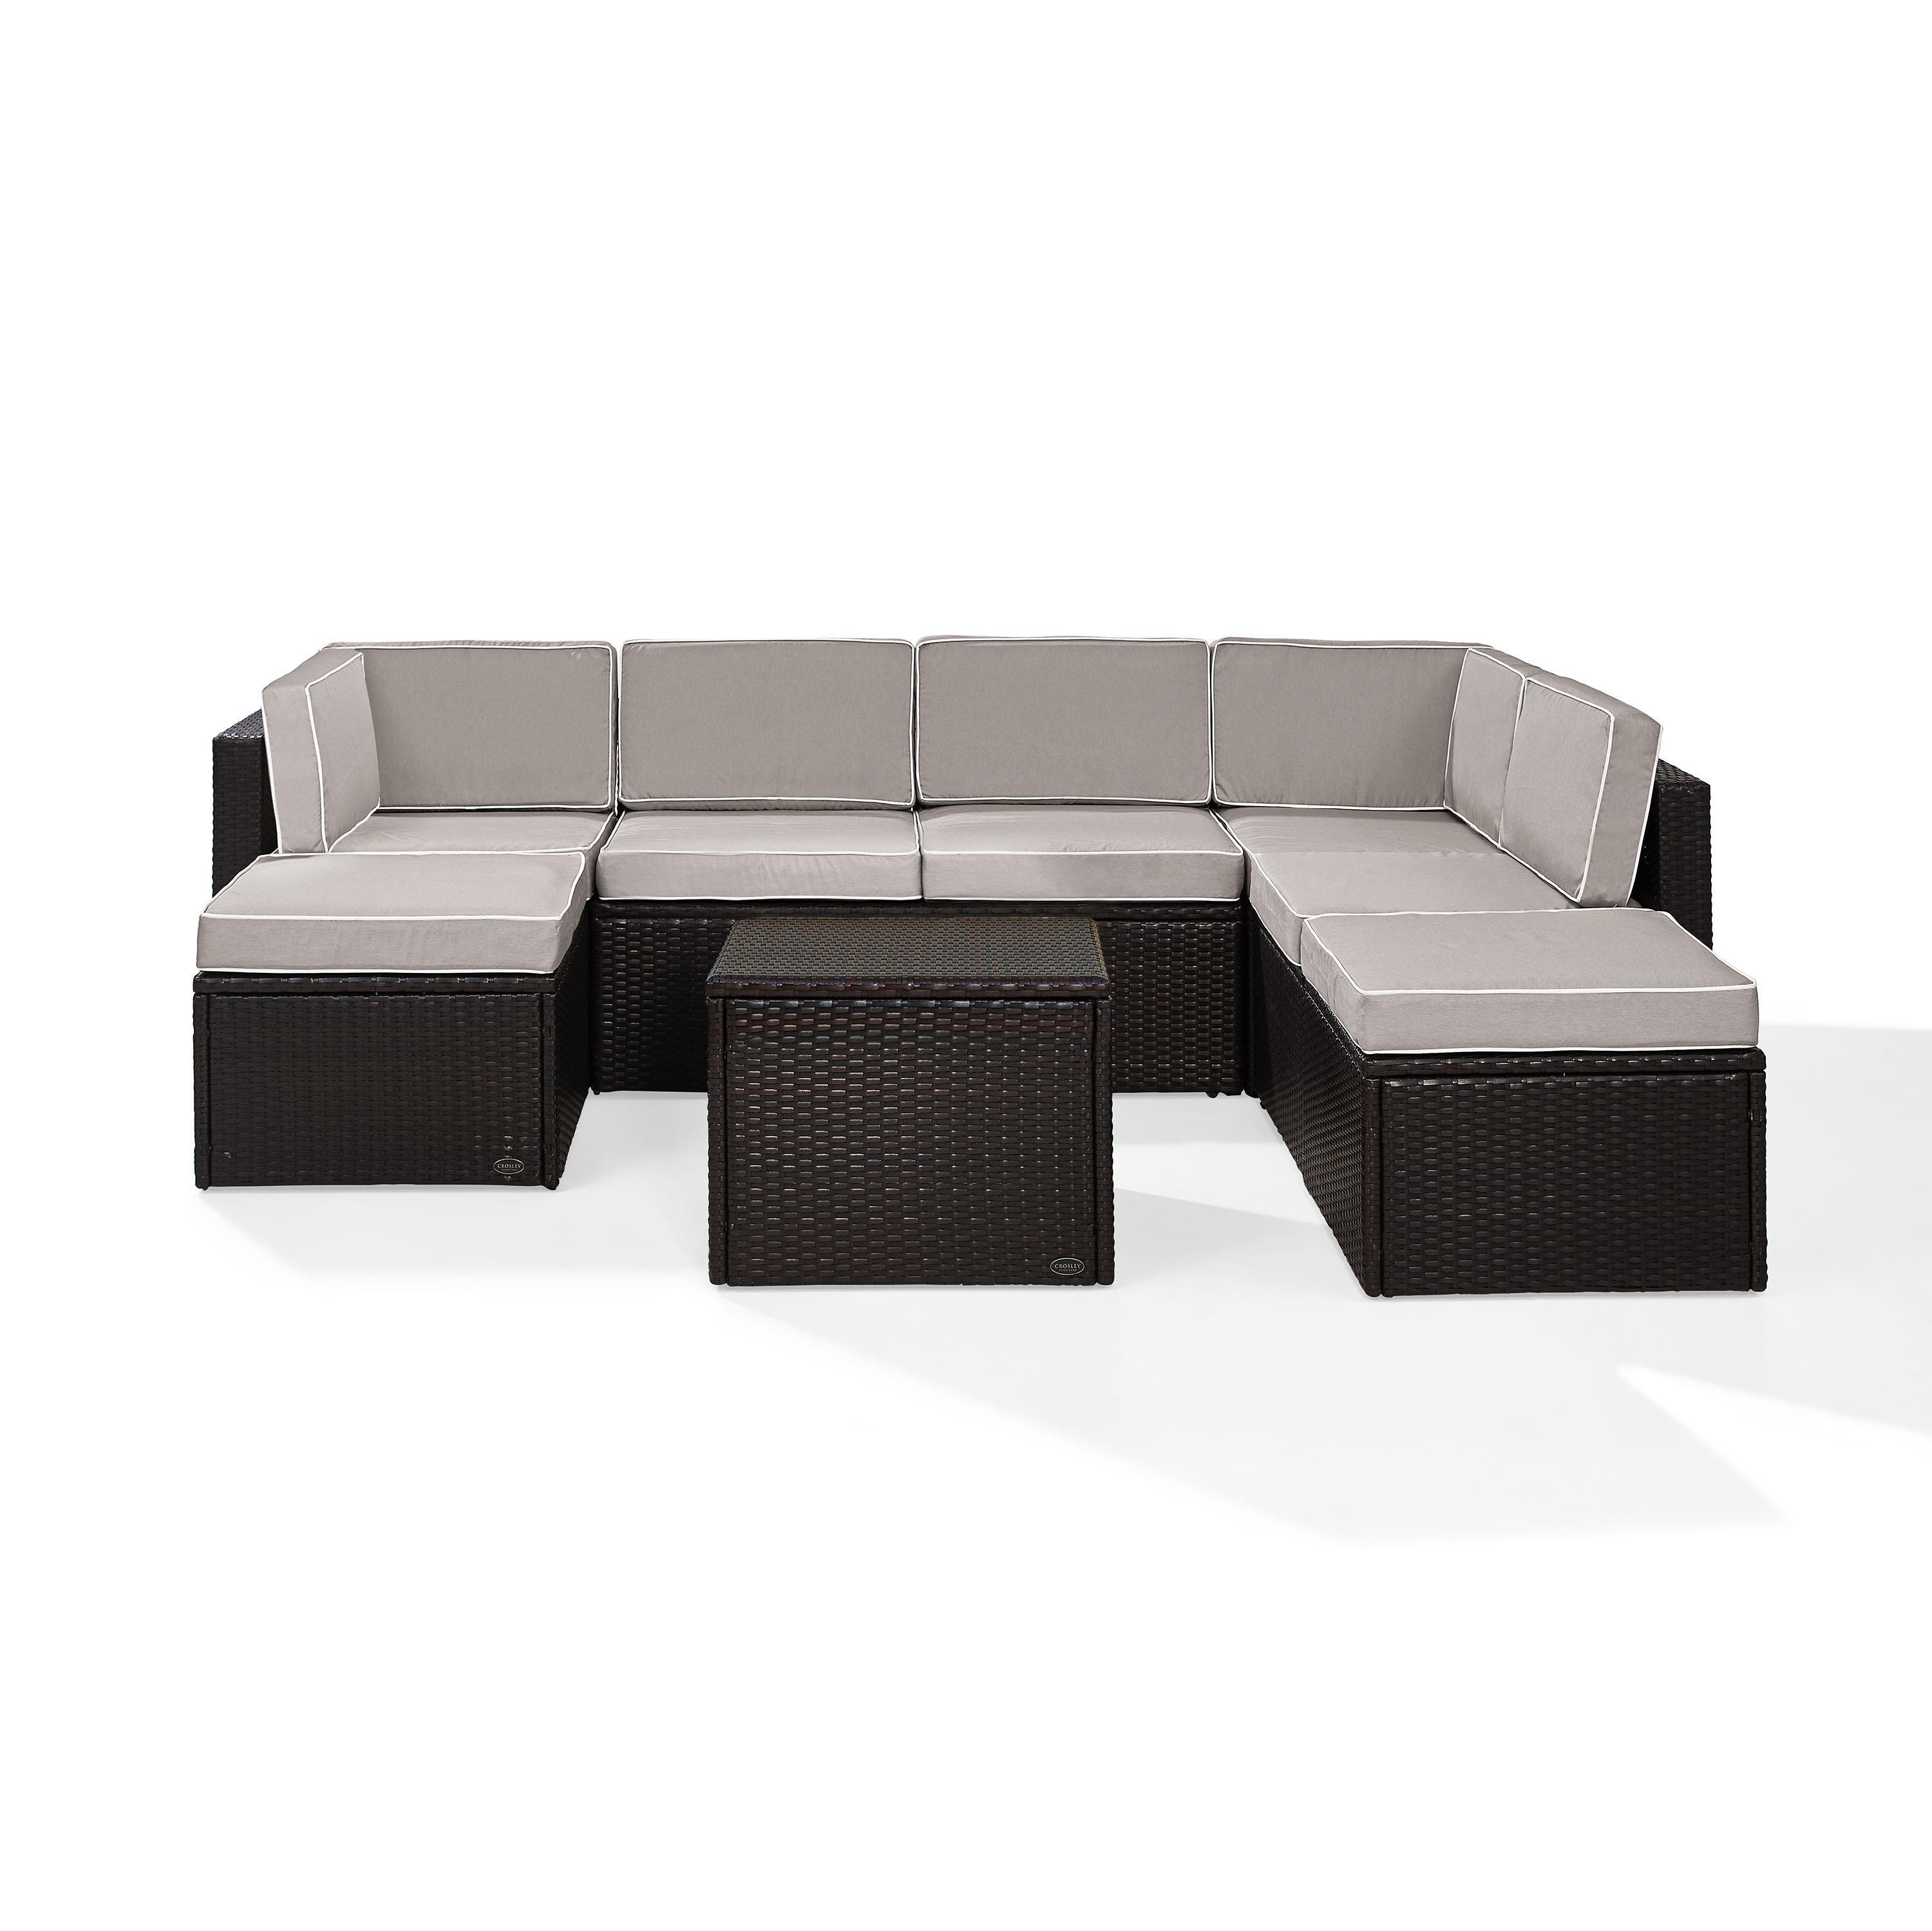 Crosley Furniture KO70008BR-GY Palm Harbor 8-Piece Resin Wicker Outdoor Sectional Seating Set (Brown/Grey) - image 2 of 7